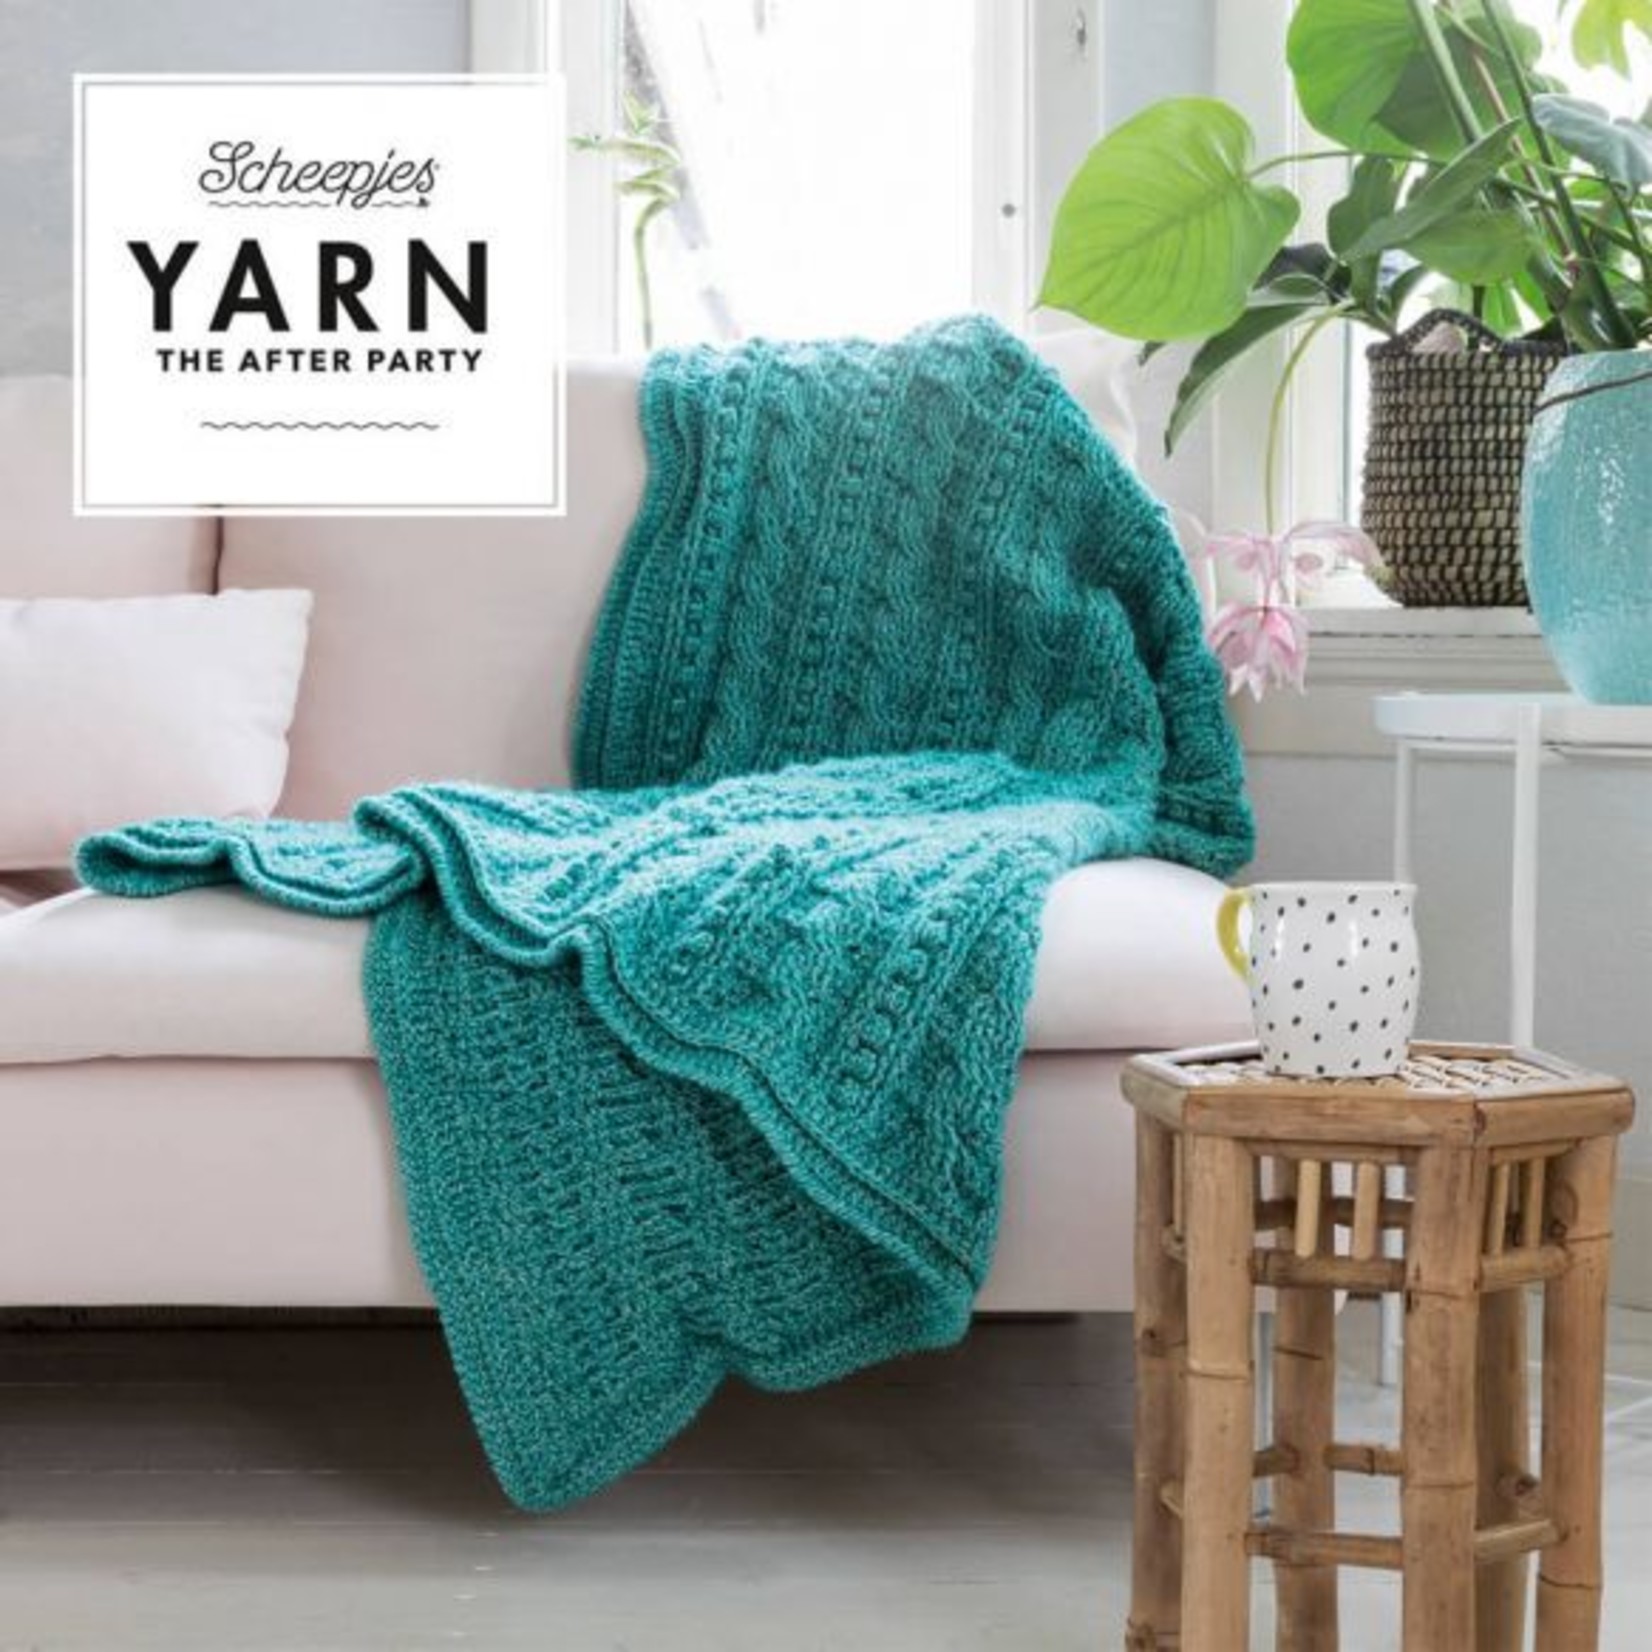 Scheepjes Haakpatroon Yarn 24 "The After Party"  Popcorn & Cables Blanket